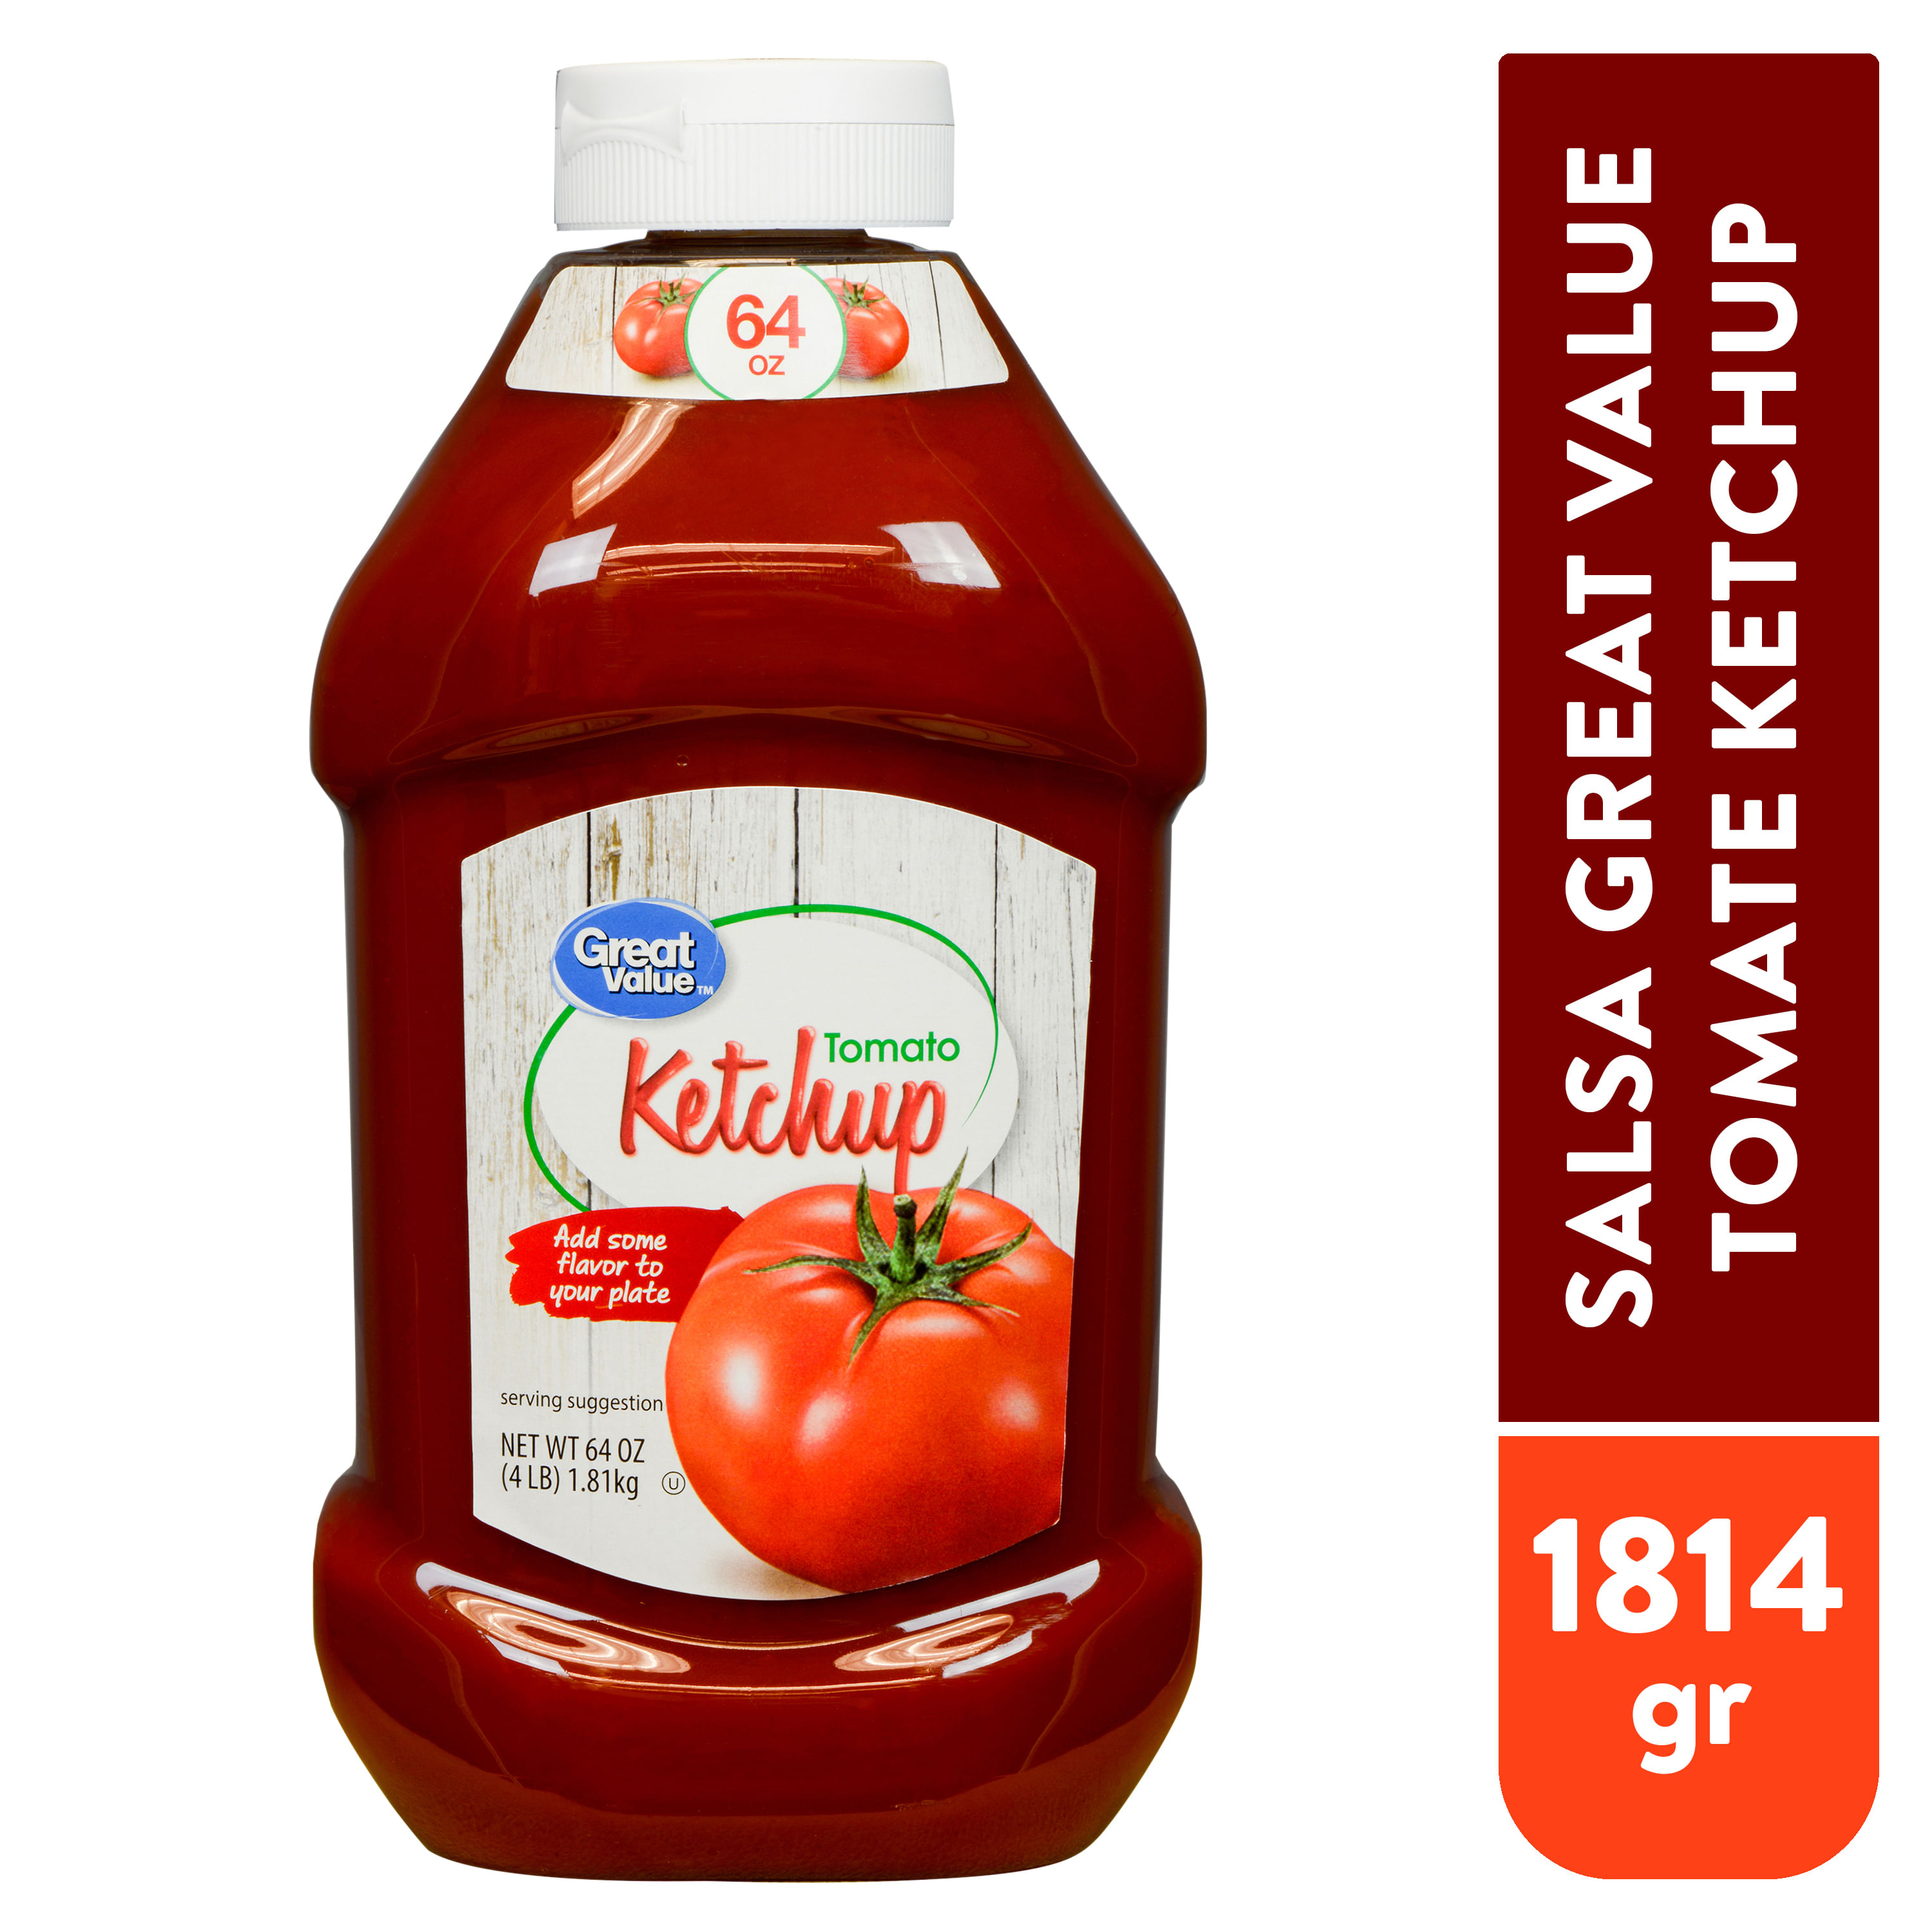 Salsa-Great-Value-Tomate-Ketchup-1814gr-1-2611